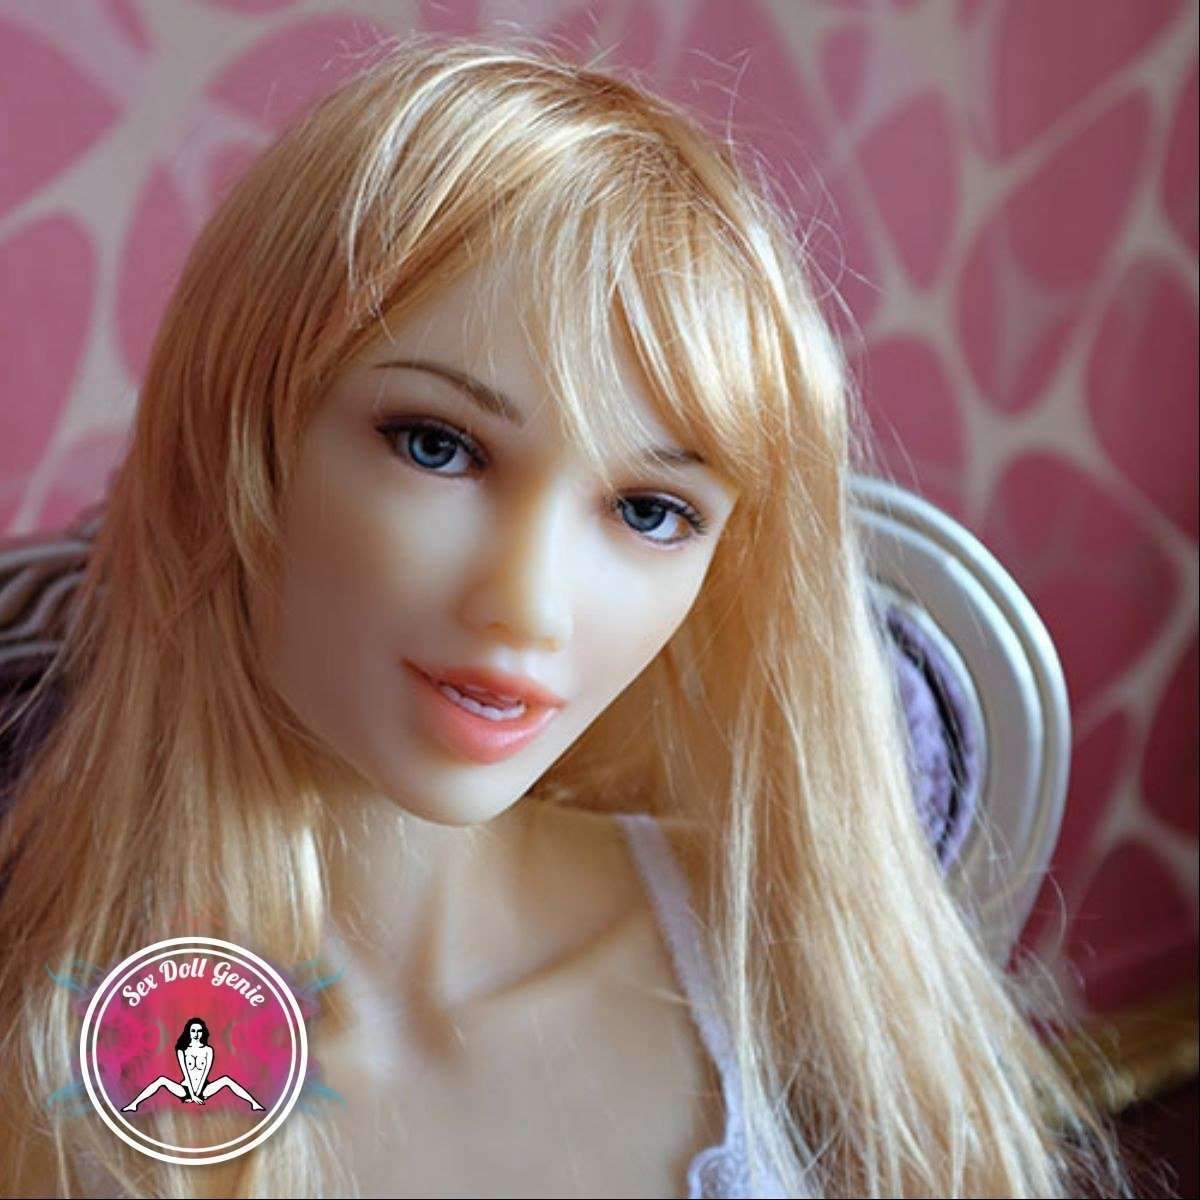 DS Doll - 163 - Penny Head - Type 1 D Cup Silicone Doll-1